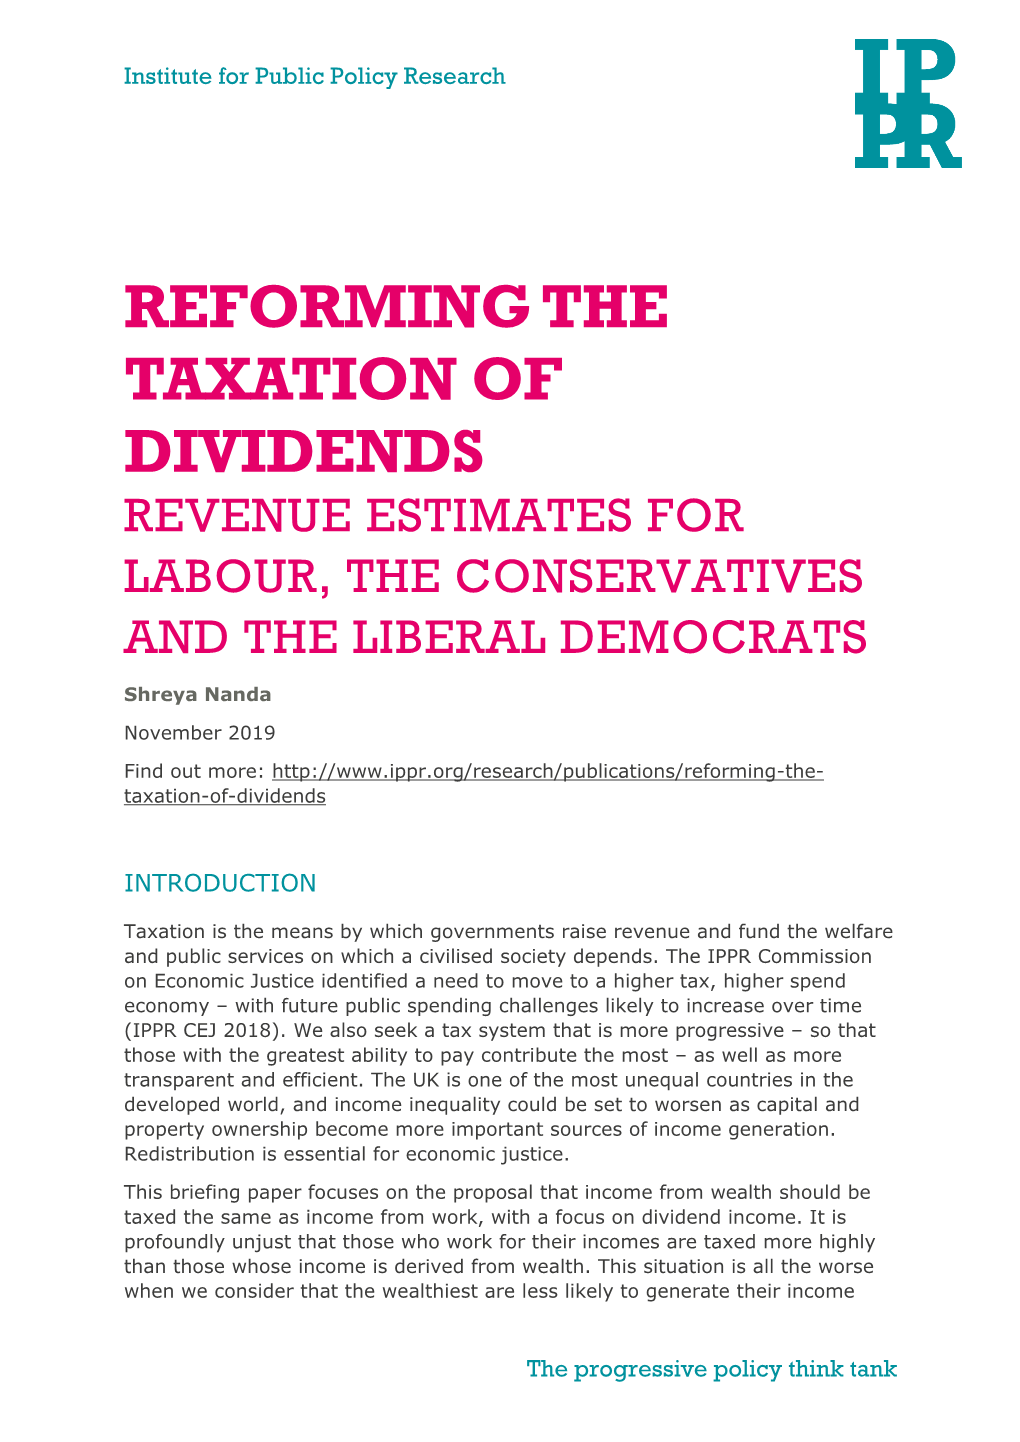 Reforming the Taxation of Dividends Revenue Estimates for Labour, the Conservatives and the Liberal Democrats